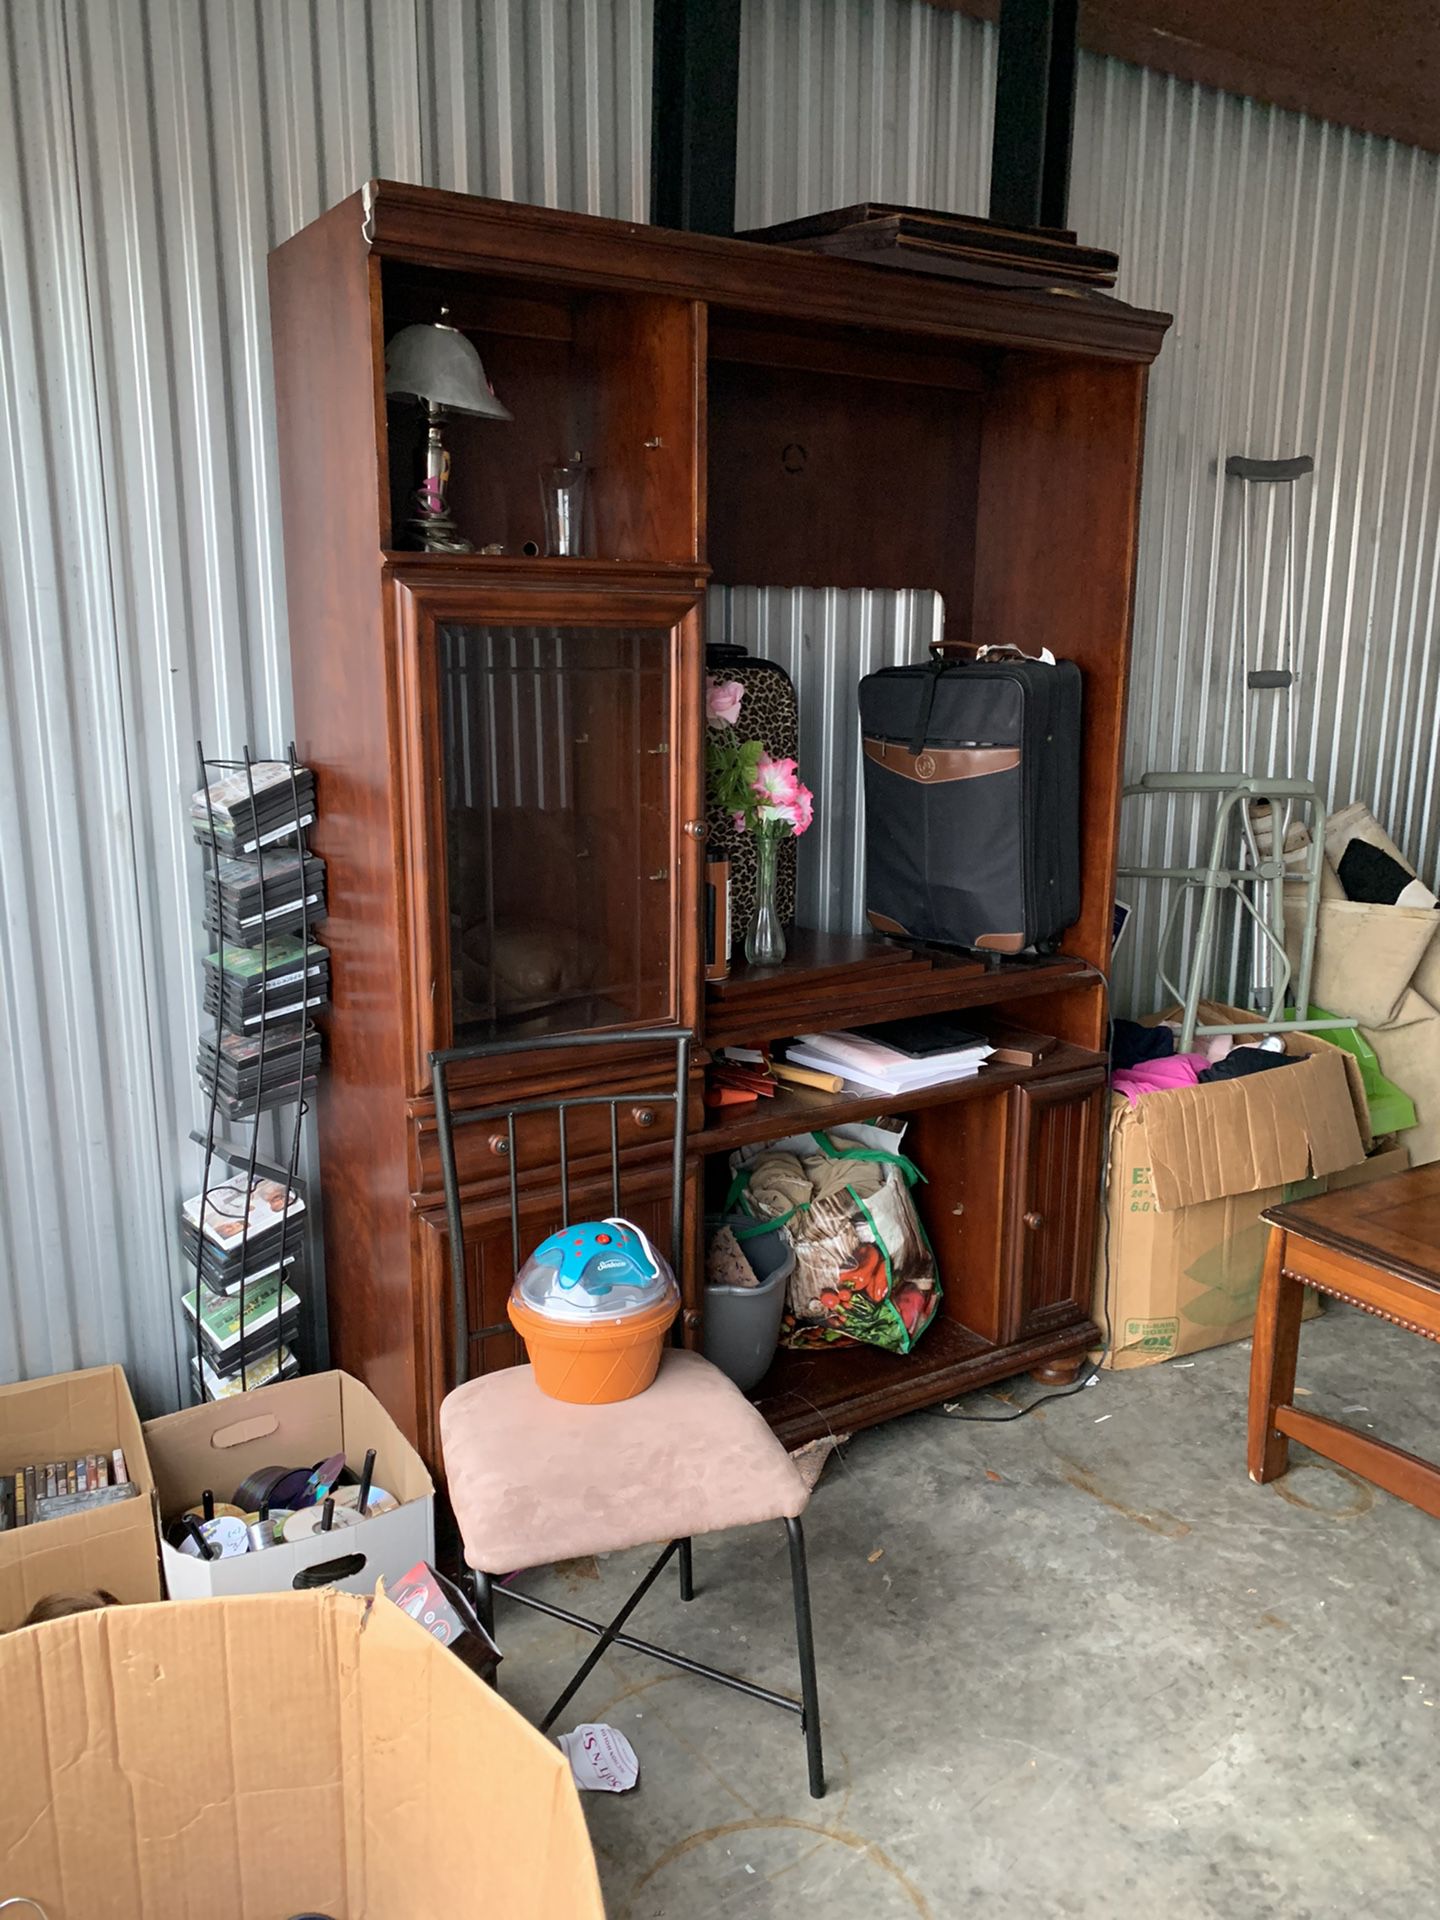 House And Office Furniture $20 Bookshelves, Bookcase, Organizer, Wood Furniture, Tv Stand, Entertainment Center, Brown,  Good Deals, Furniture.